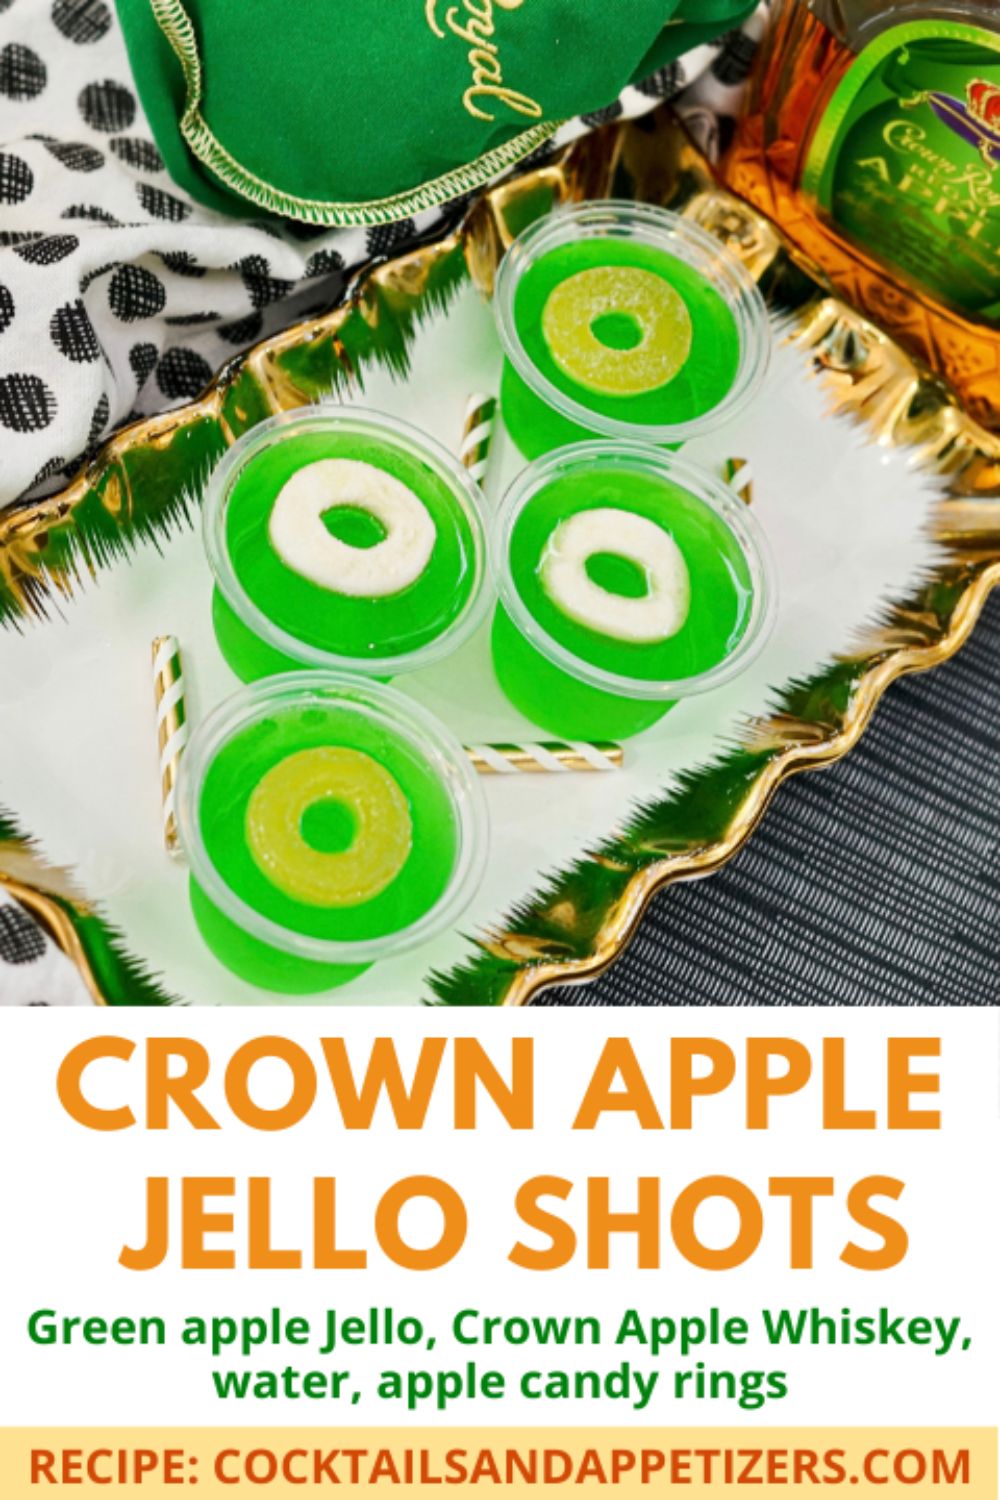 Crown Apple Jello shots with apple ring garnish on a tray